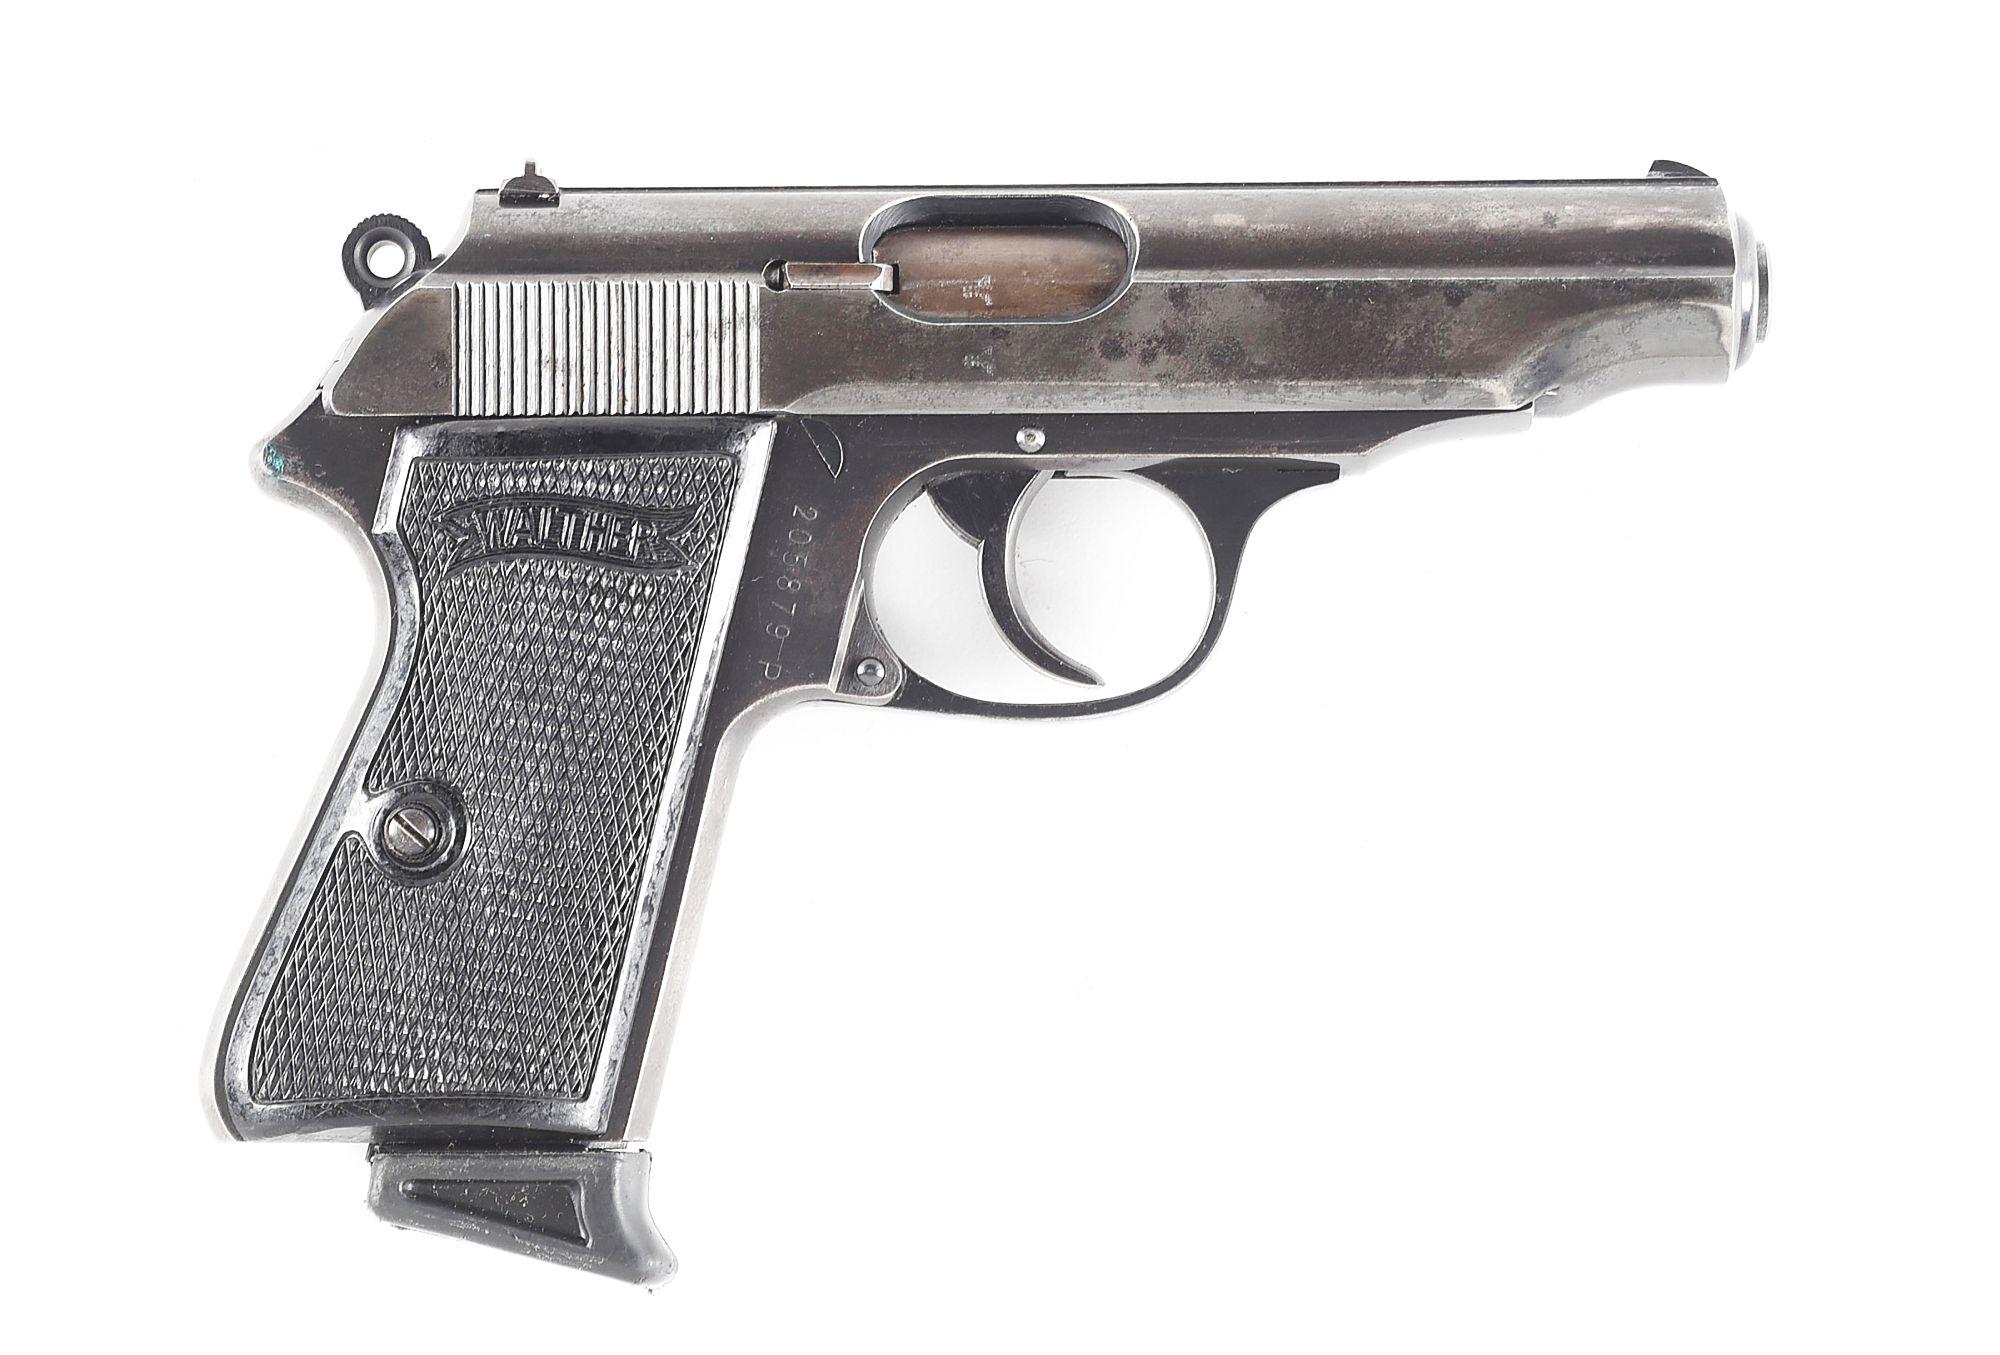 (C) SCARCE RFV MARKED WALTHER PP SEMI AUTOMATIC PISTOL.